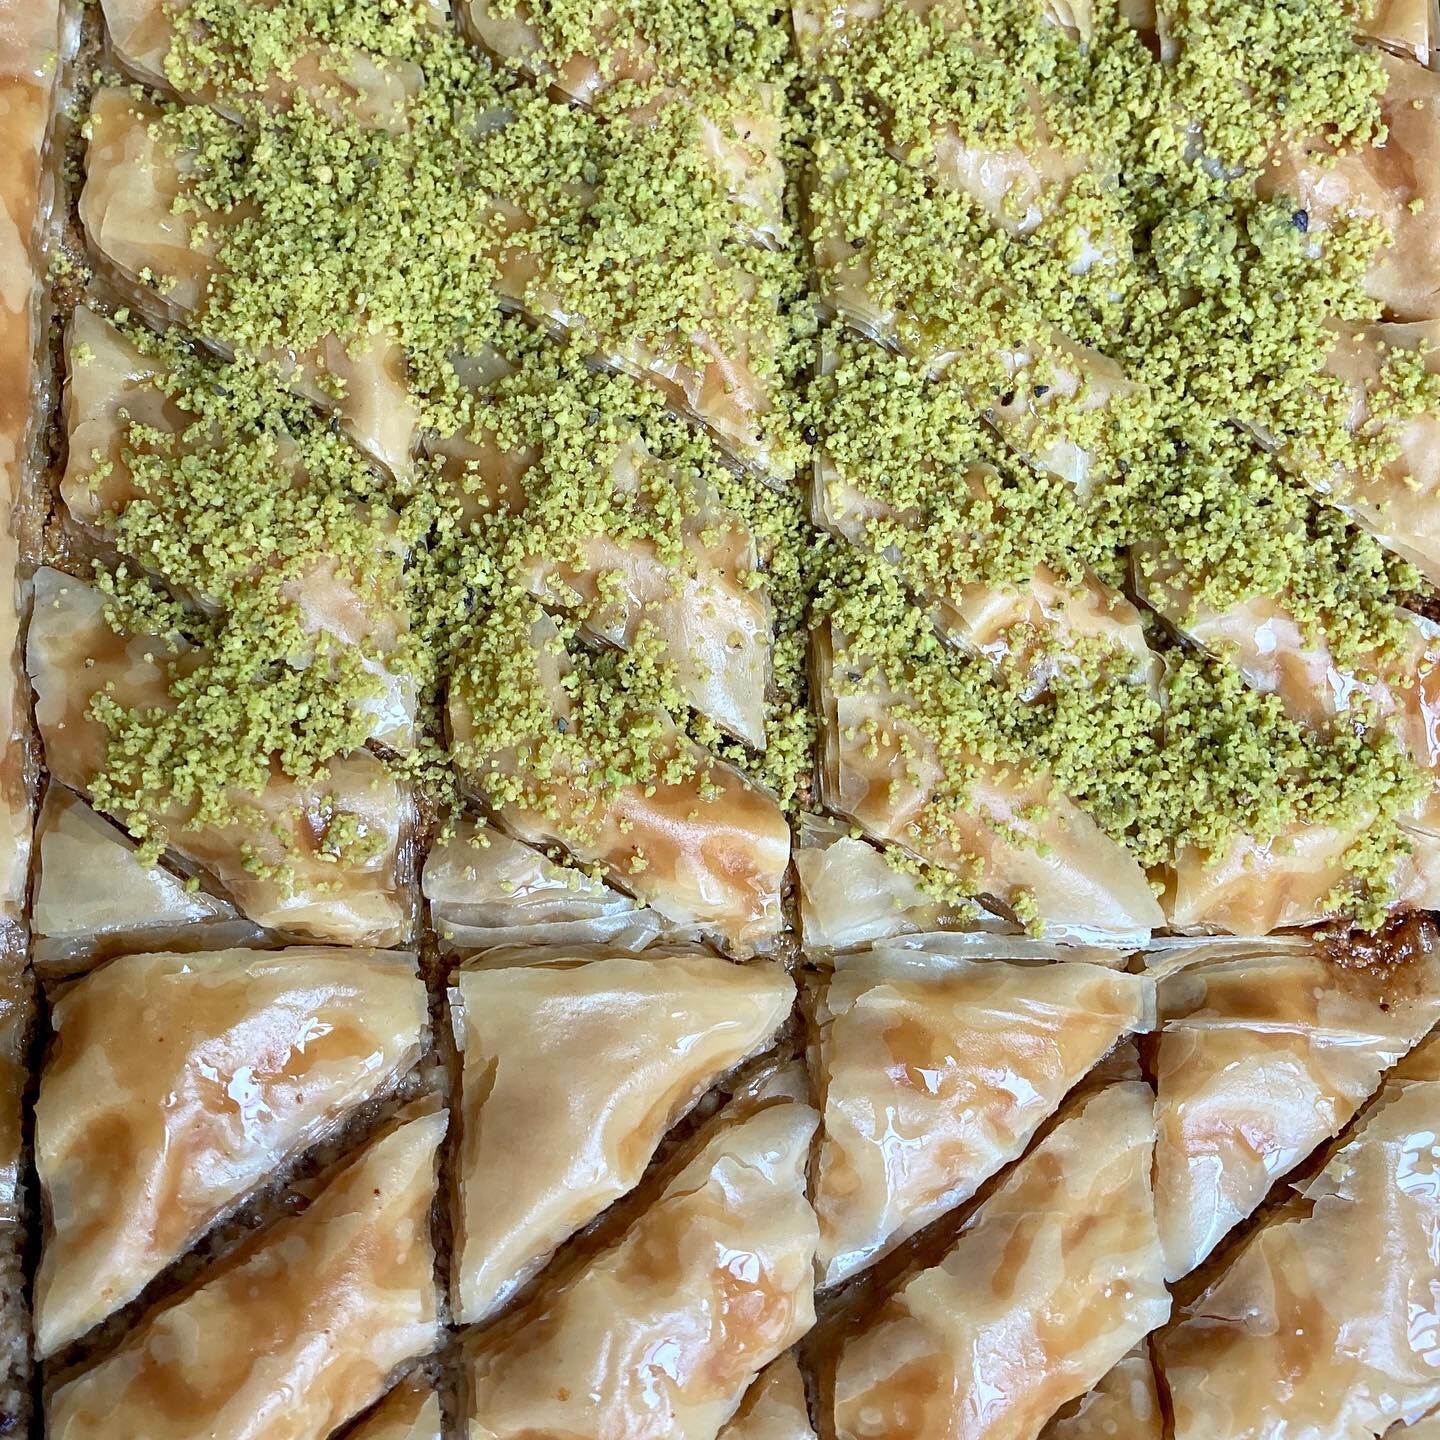 Saturday at Binti&rsquo;s ❤️ first up a classic mixed pistachio/walnut tray. Next up, working on a new addition to the rotating menu: clotted cream fillo rolls. Stay tuned for progress throughout the day!  #baklava #mymgm #bintis #hampsteadliving